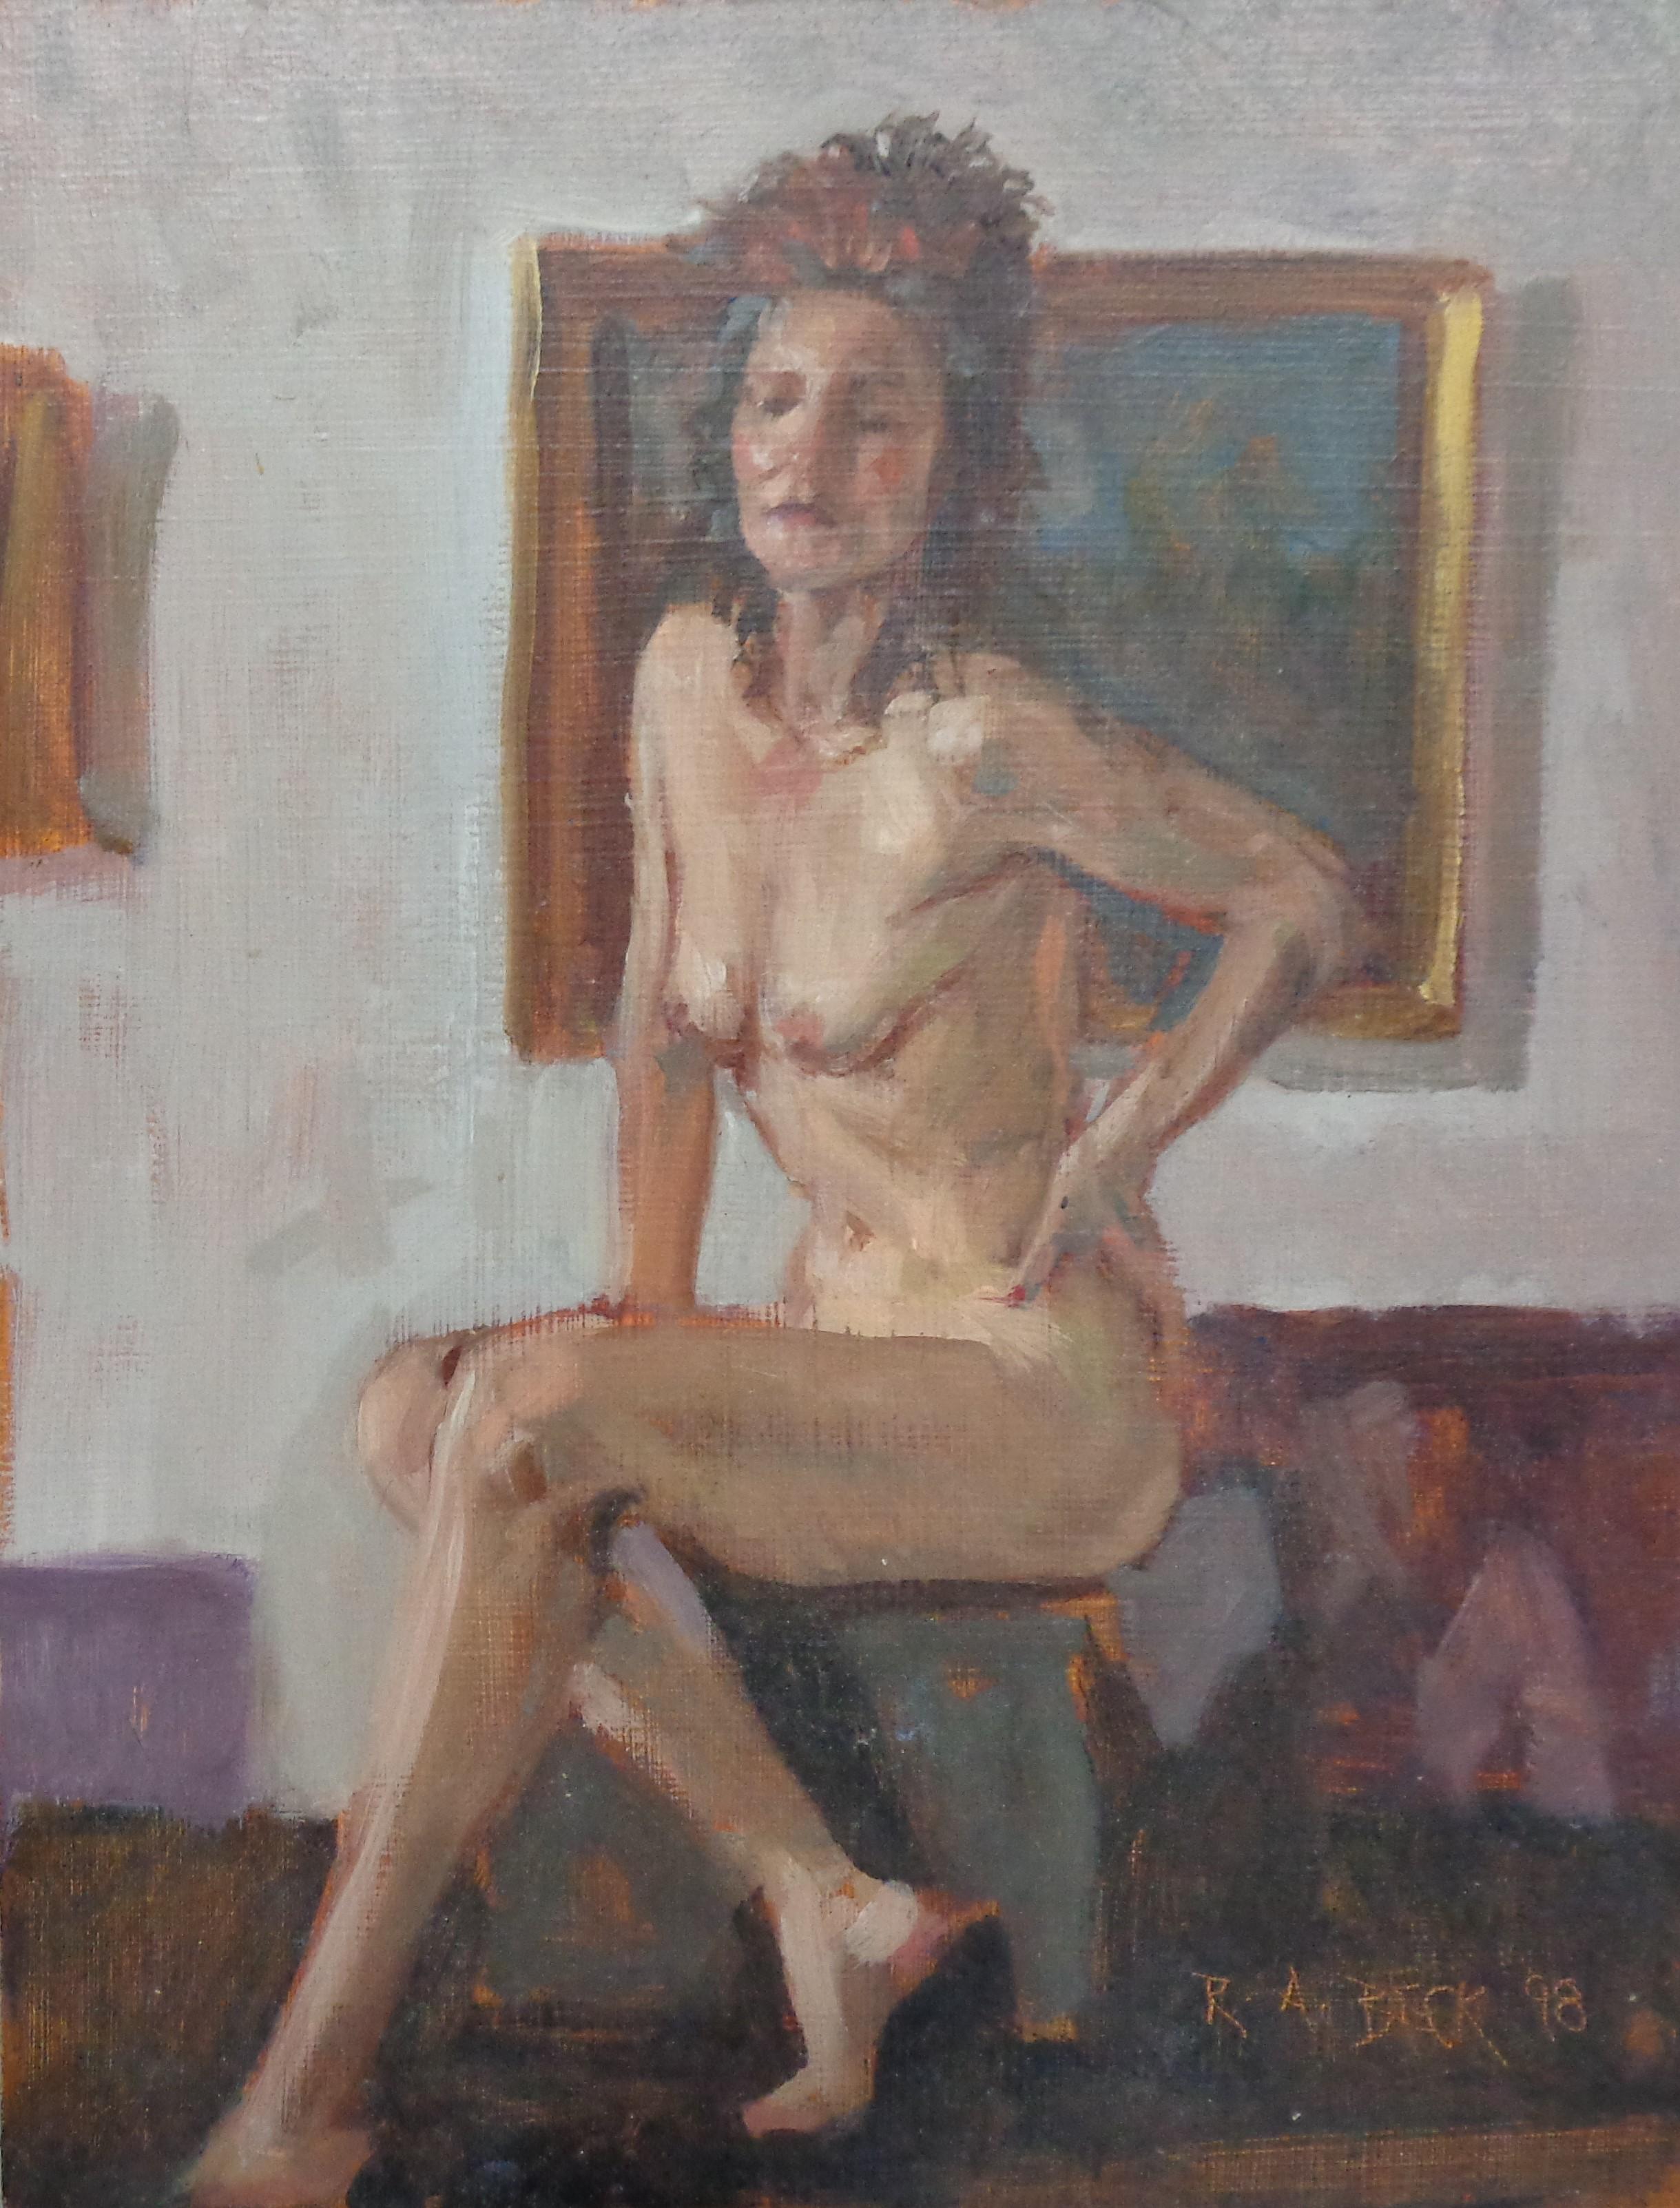 Here is a tradition female figure study oil painting on Masonite by Lambertville artist Robert beck. Makes a nice pair with the other female nude listed here on 1stdibs. The painting is in good condition and comes unframed
ARTIST'S STATEMENT
I have